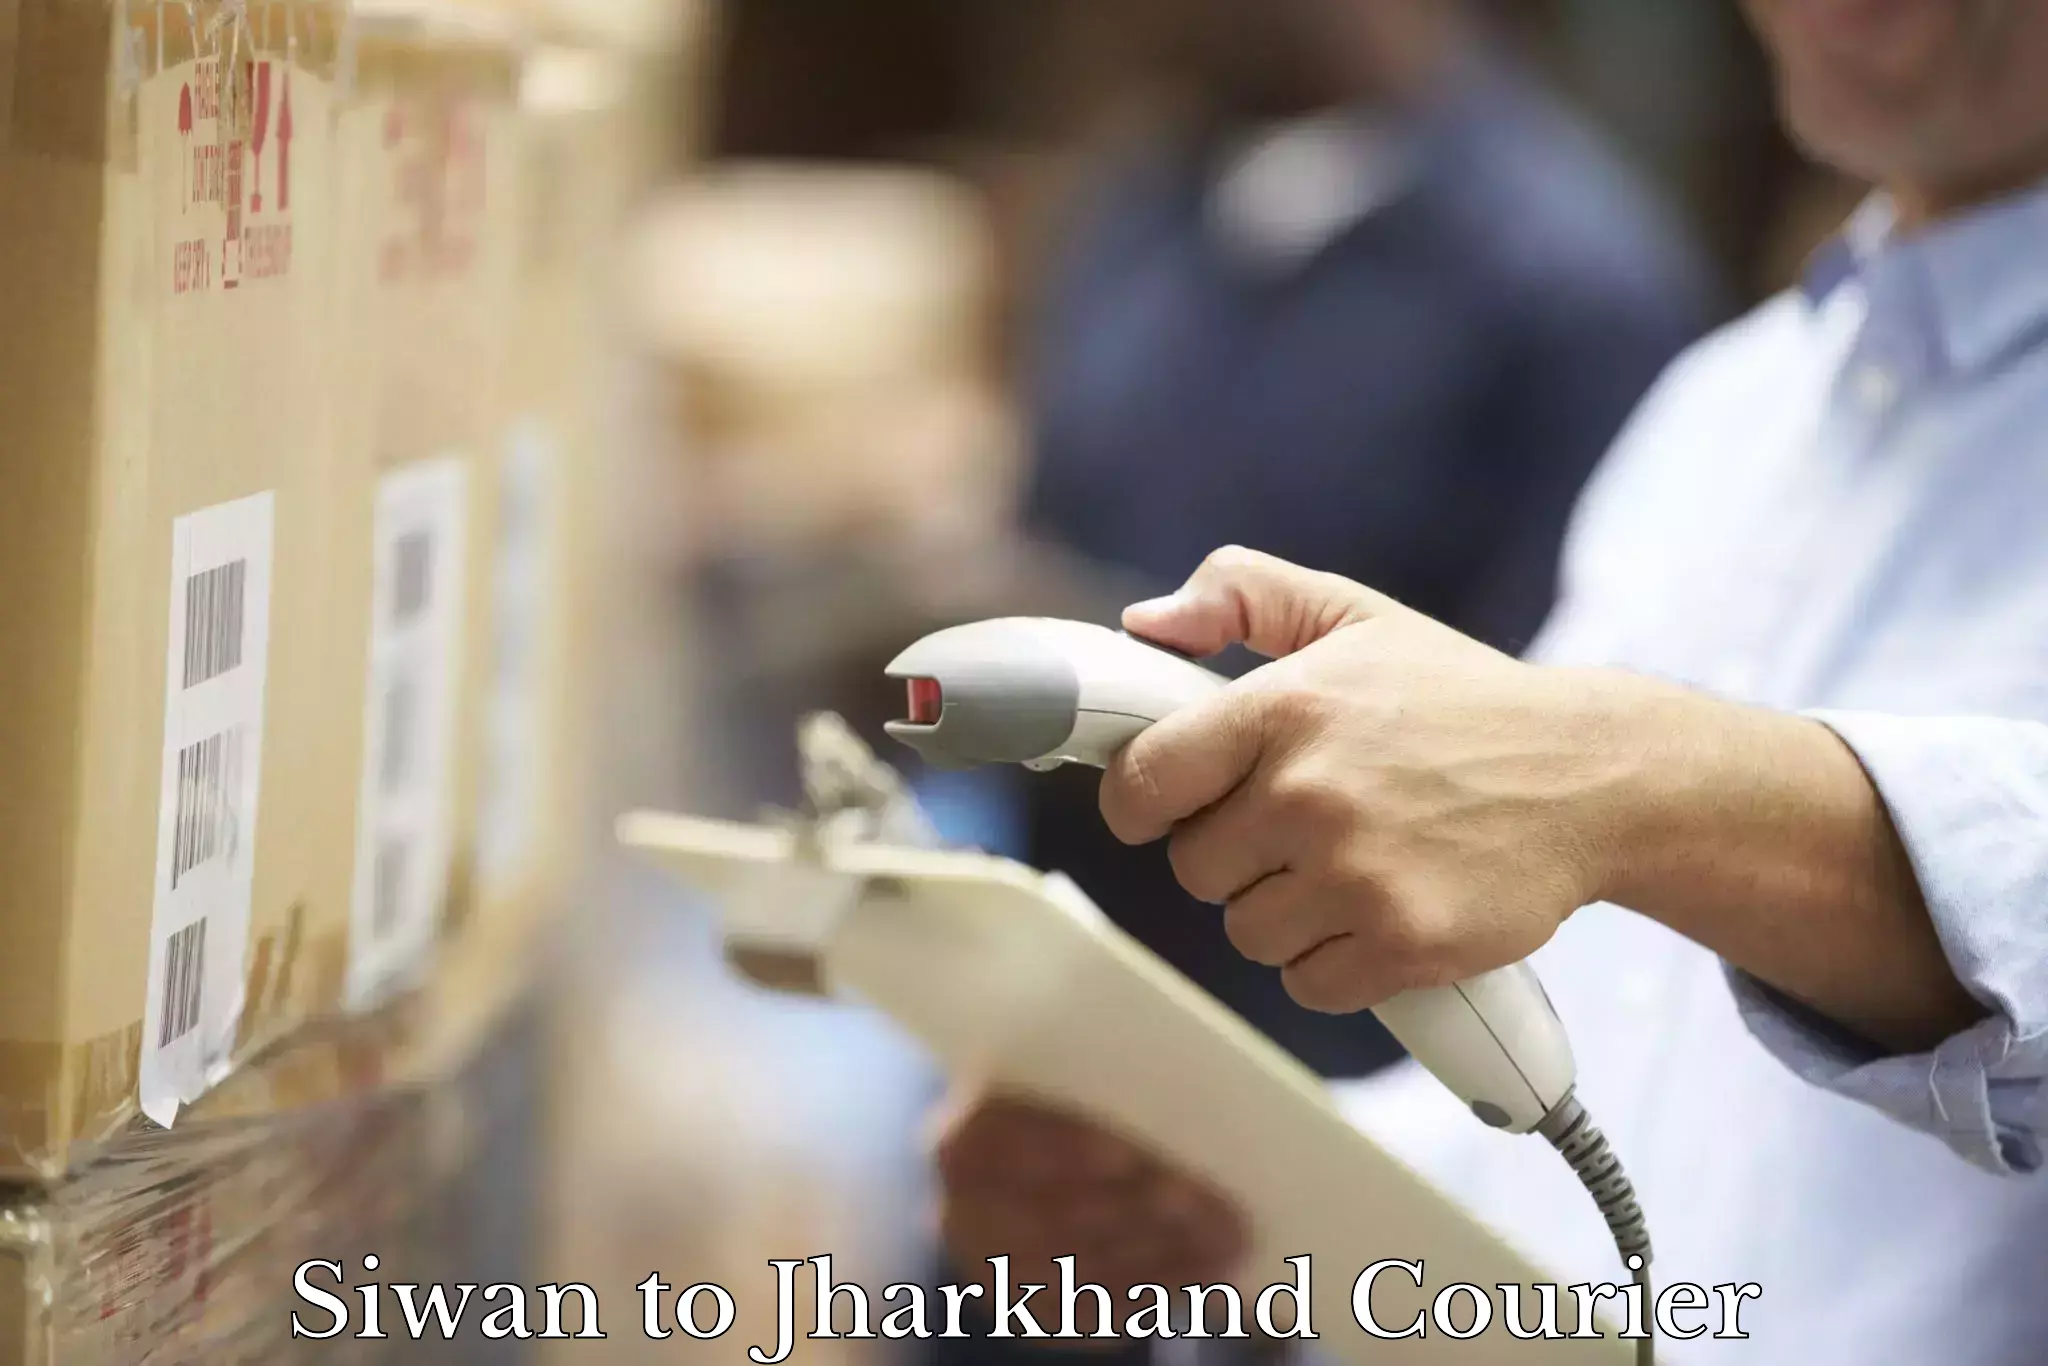 Courier service innovation Siwan to Jamshedpur